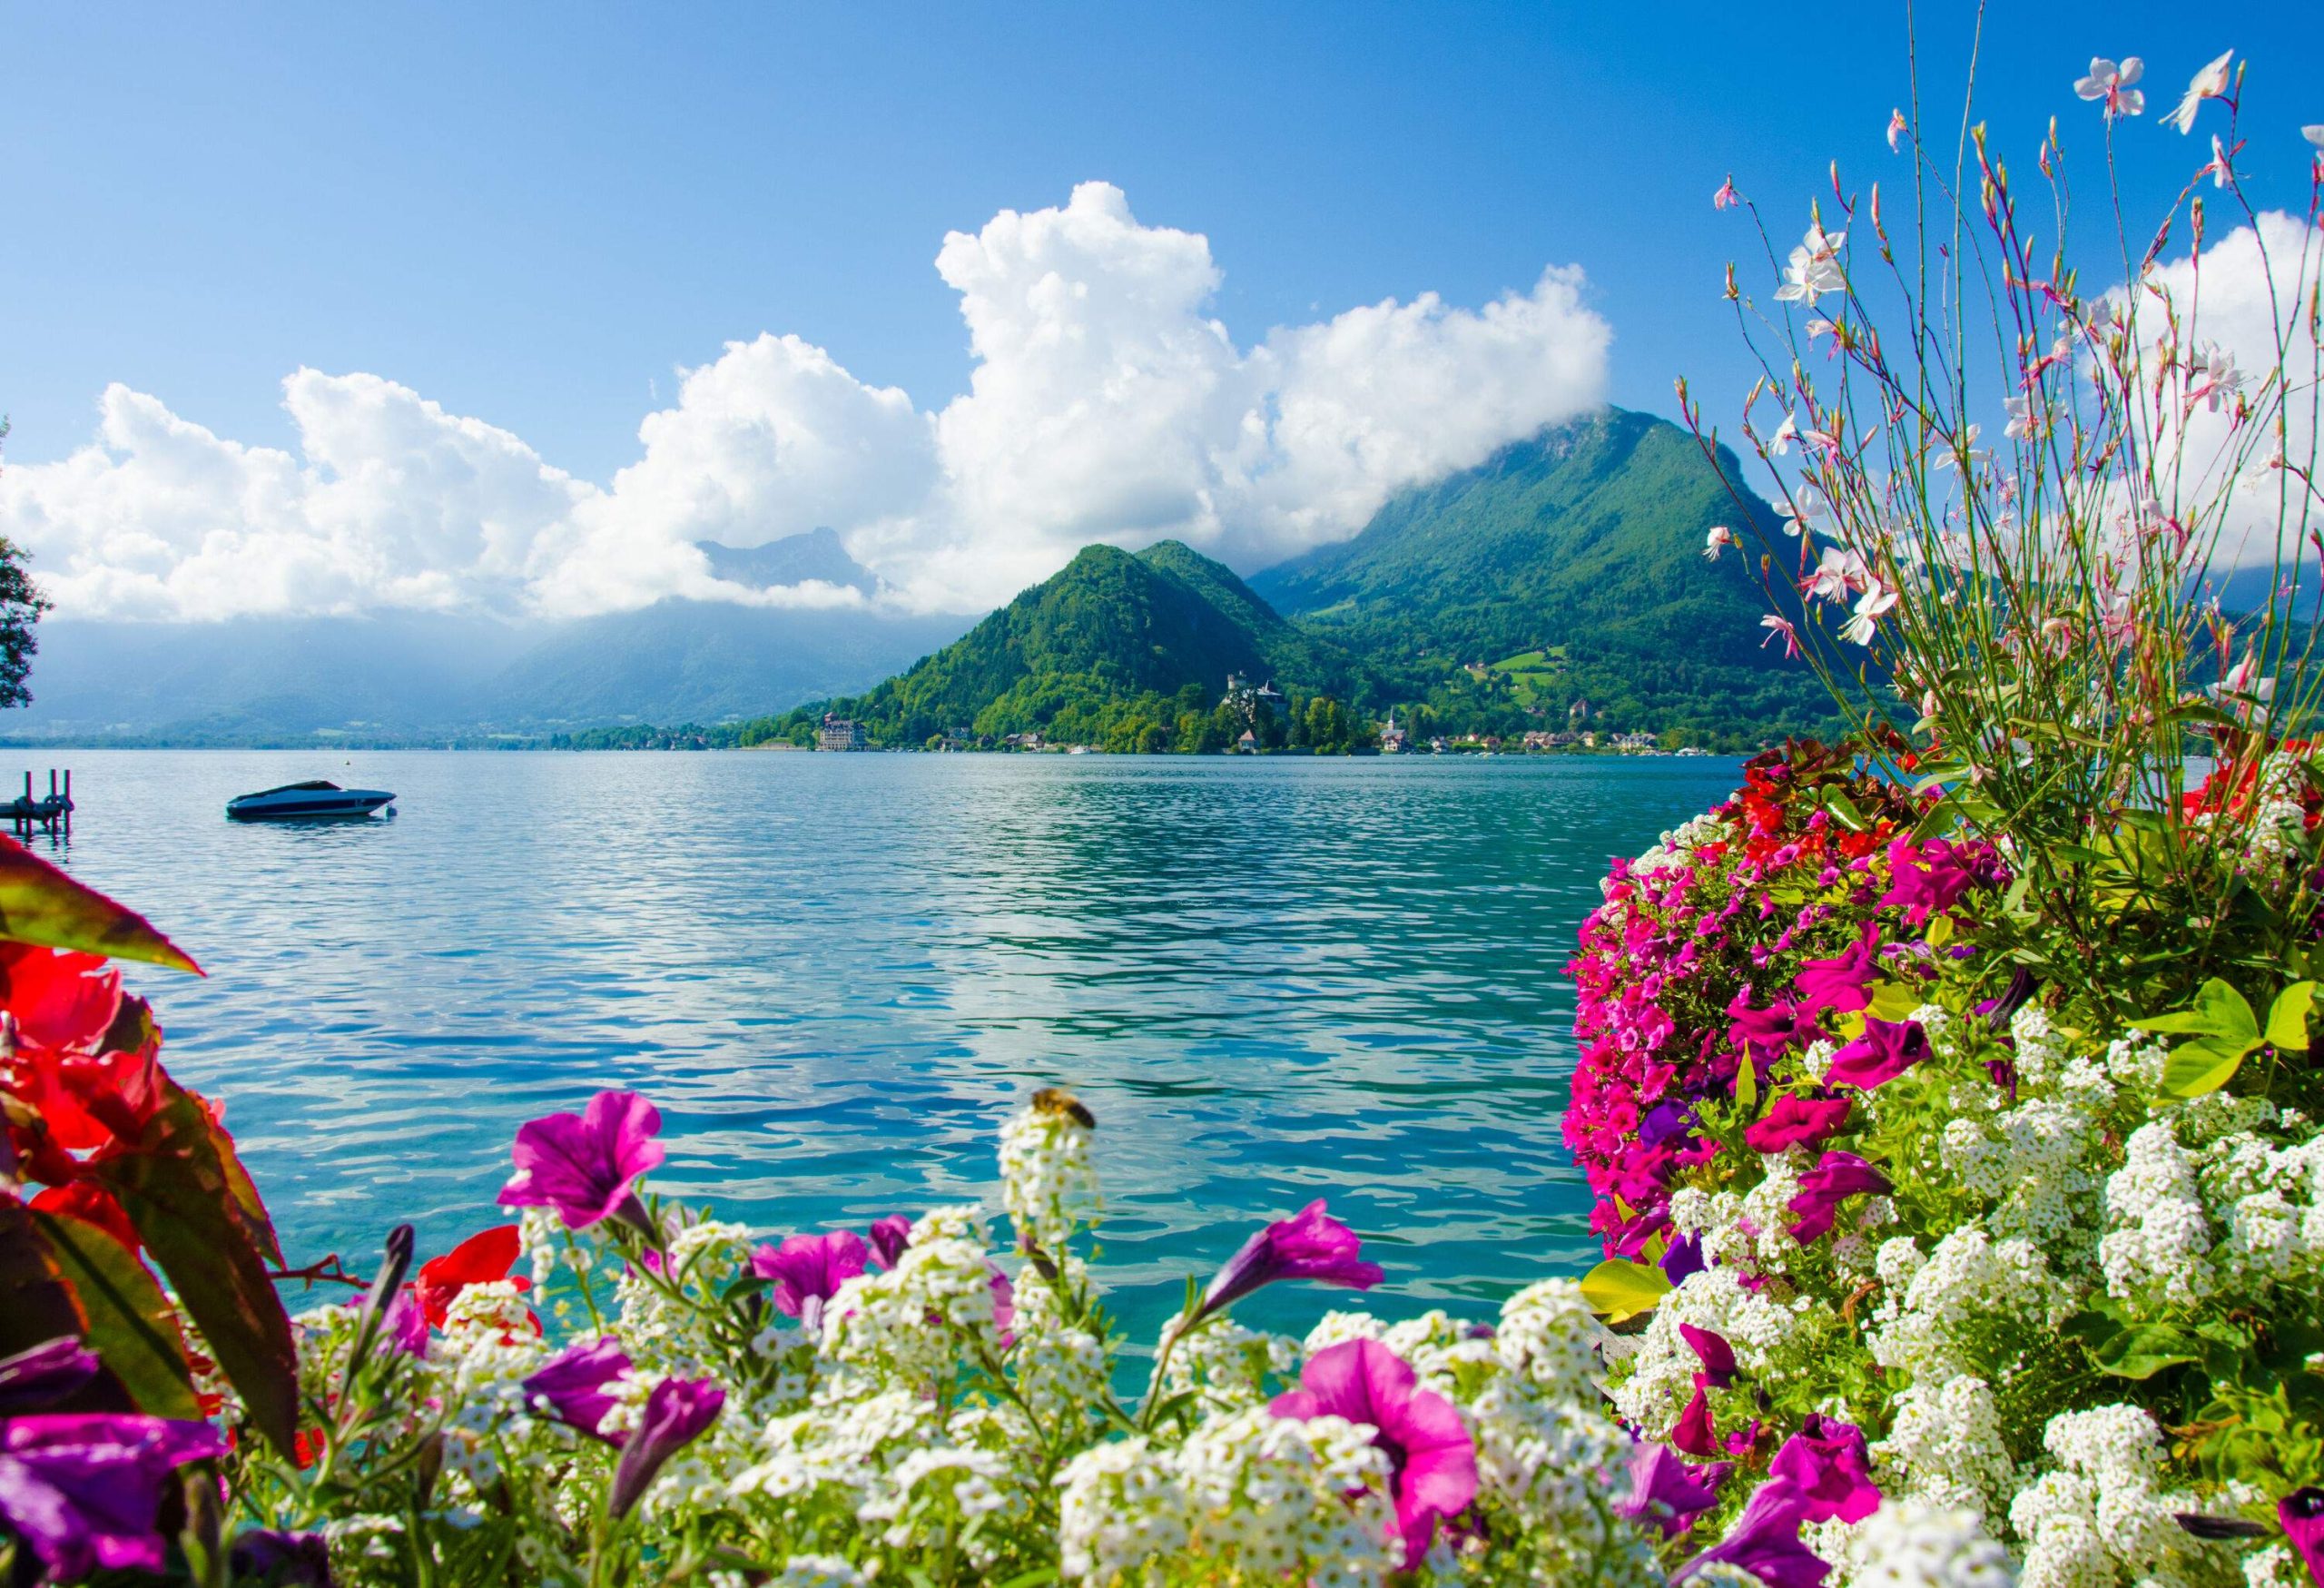 A beautiful lake framed by multi-coloured flowers with mountains in the background.